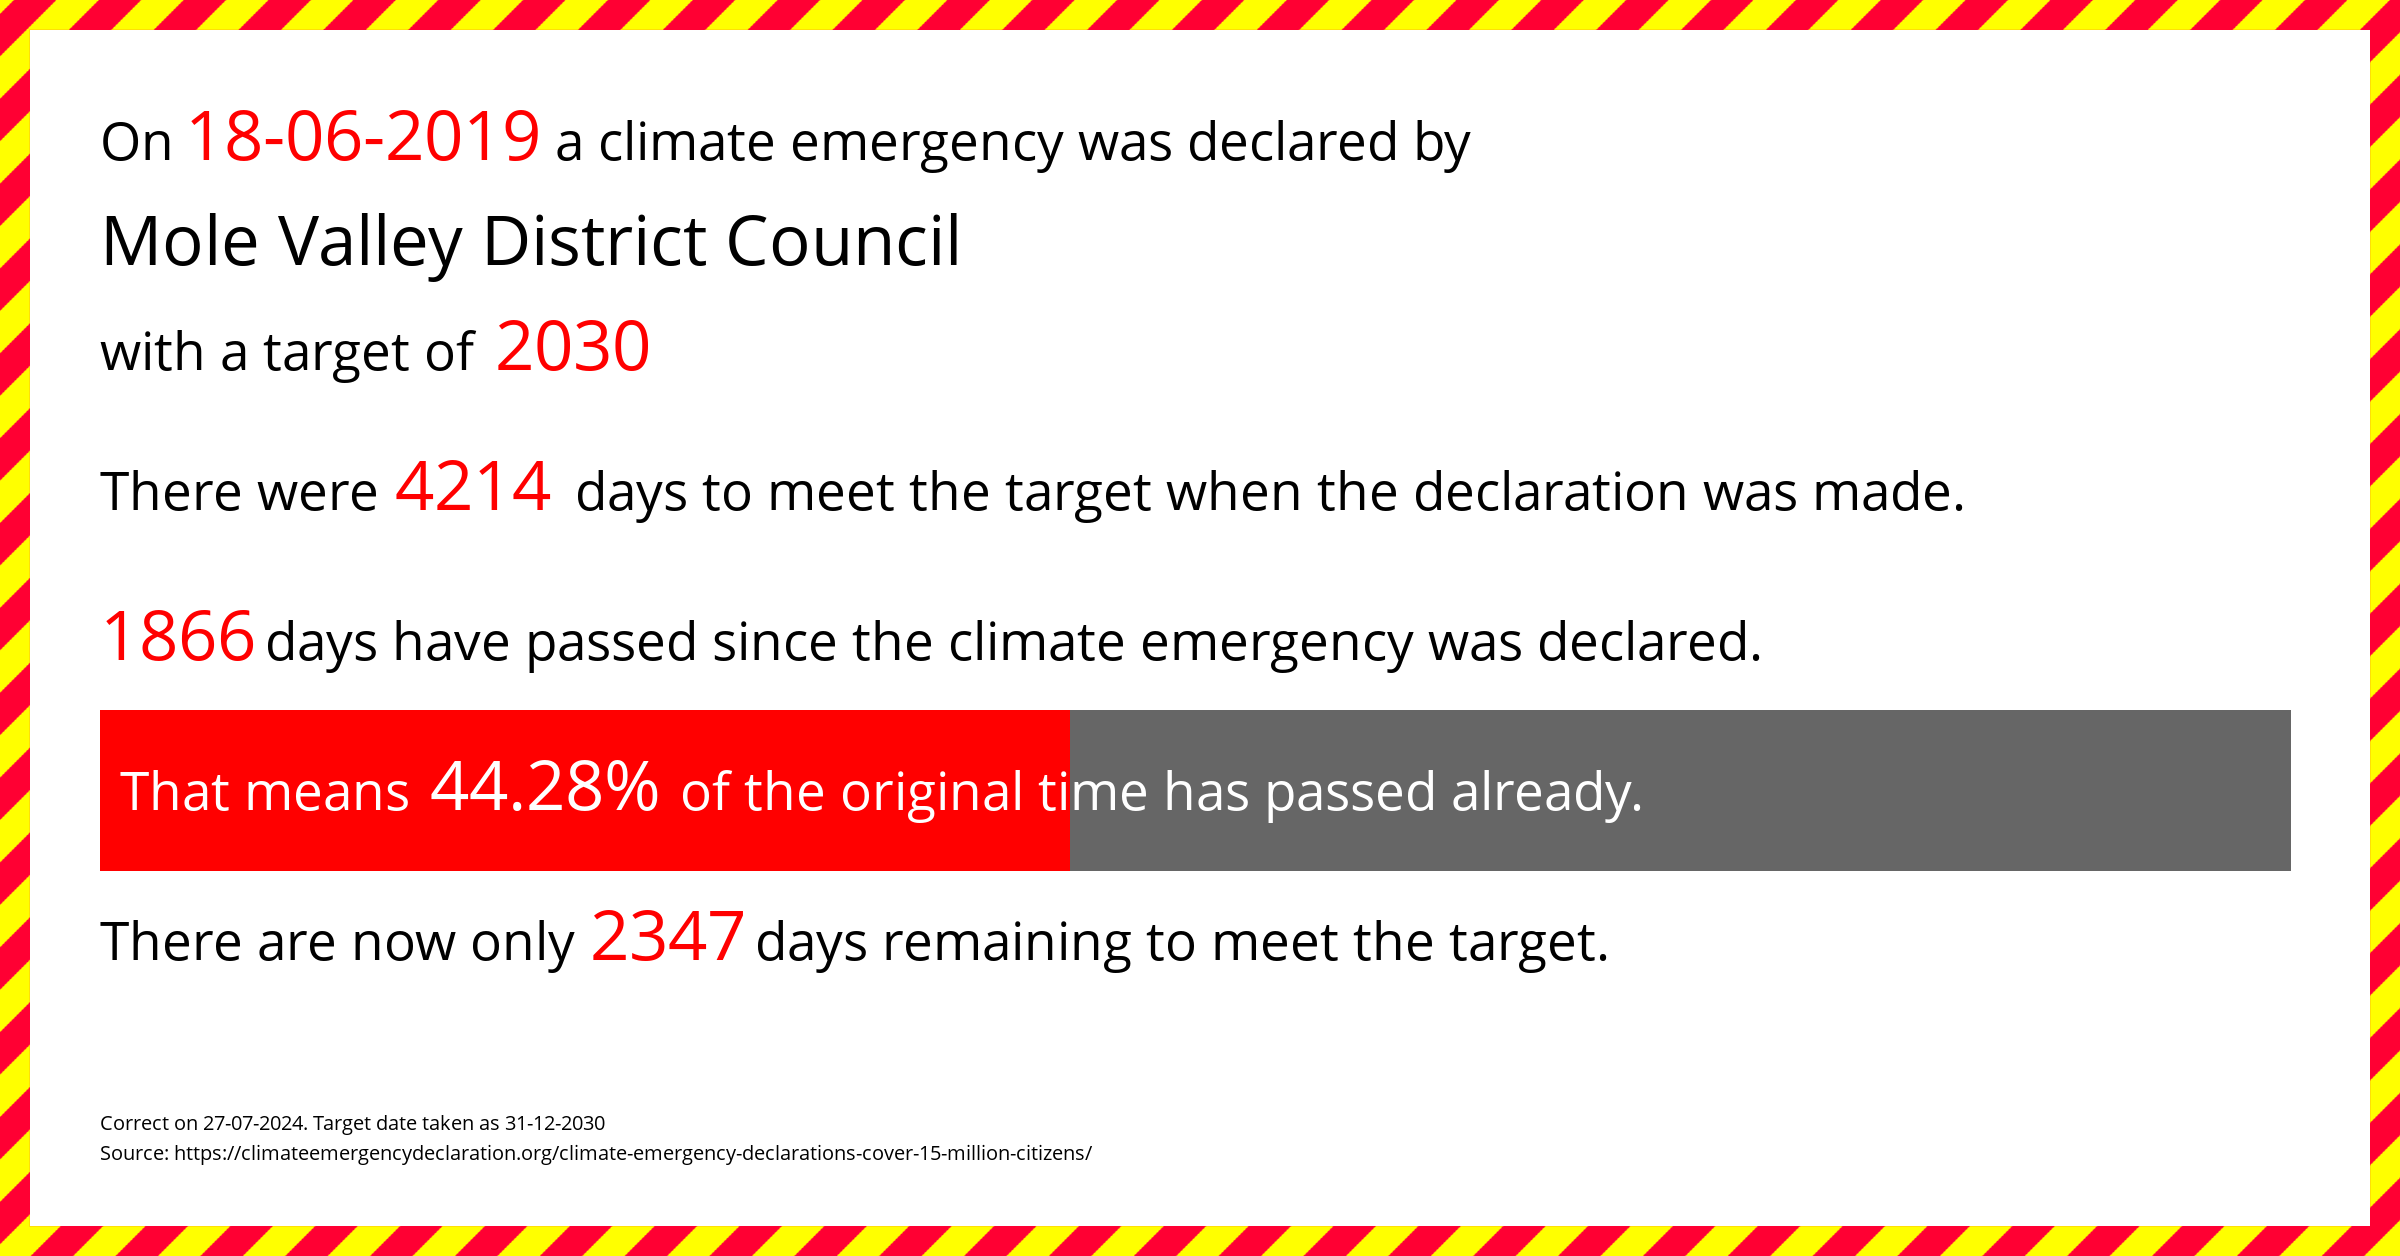 Mole Valley District Council declared a Climate emergency on Tuesday 18th June 2019, with a target of 2030.